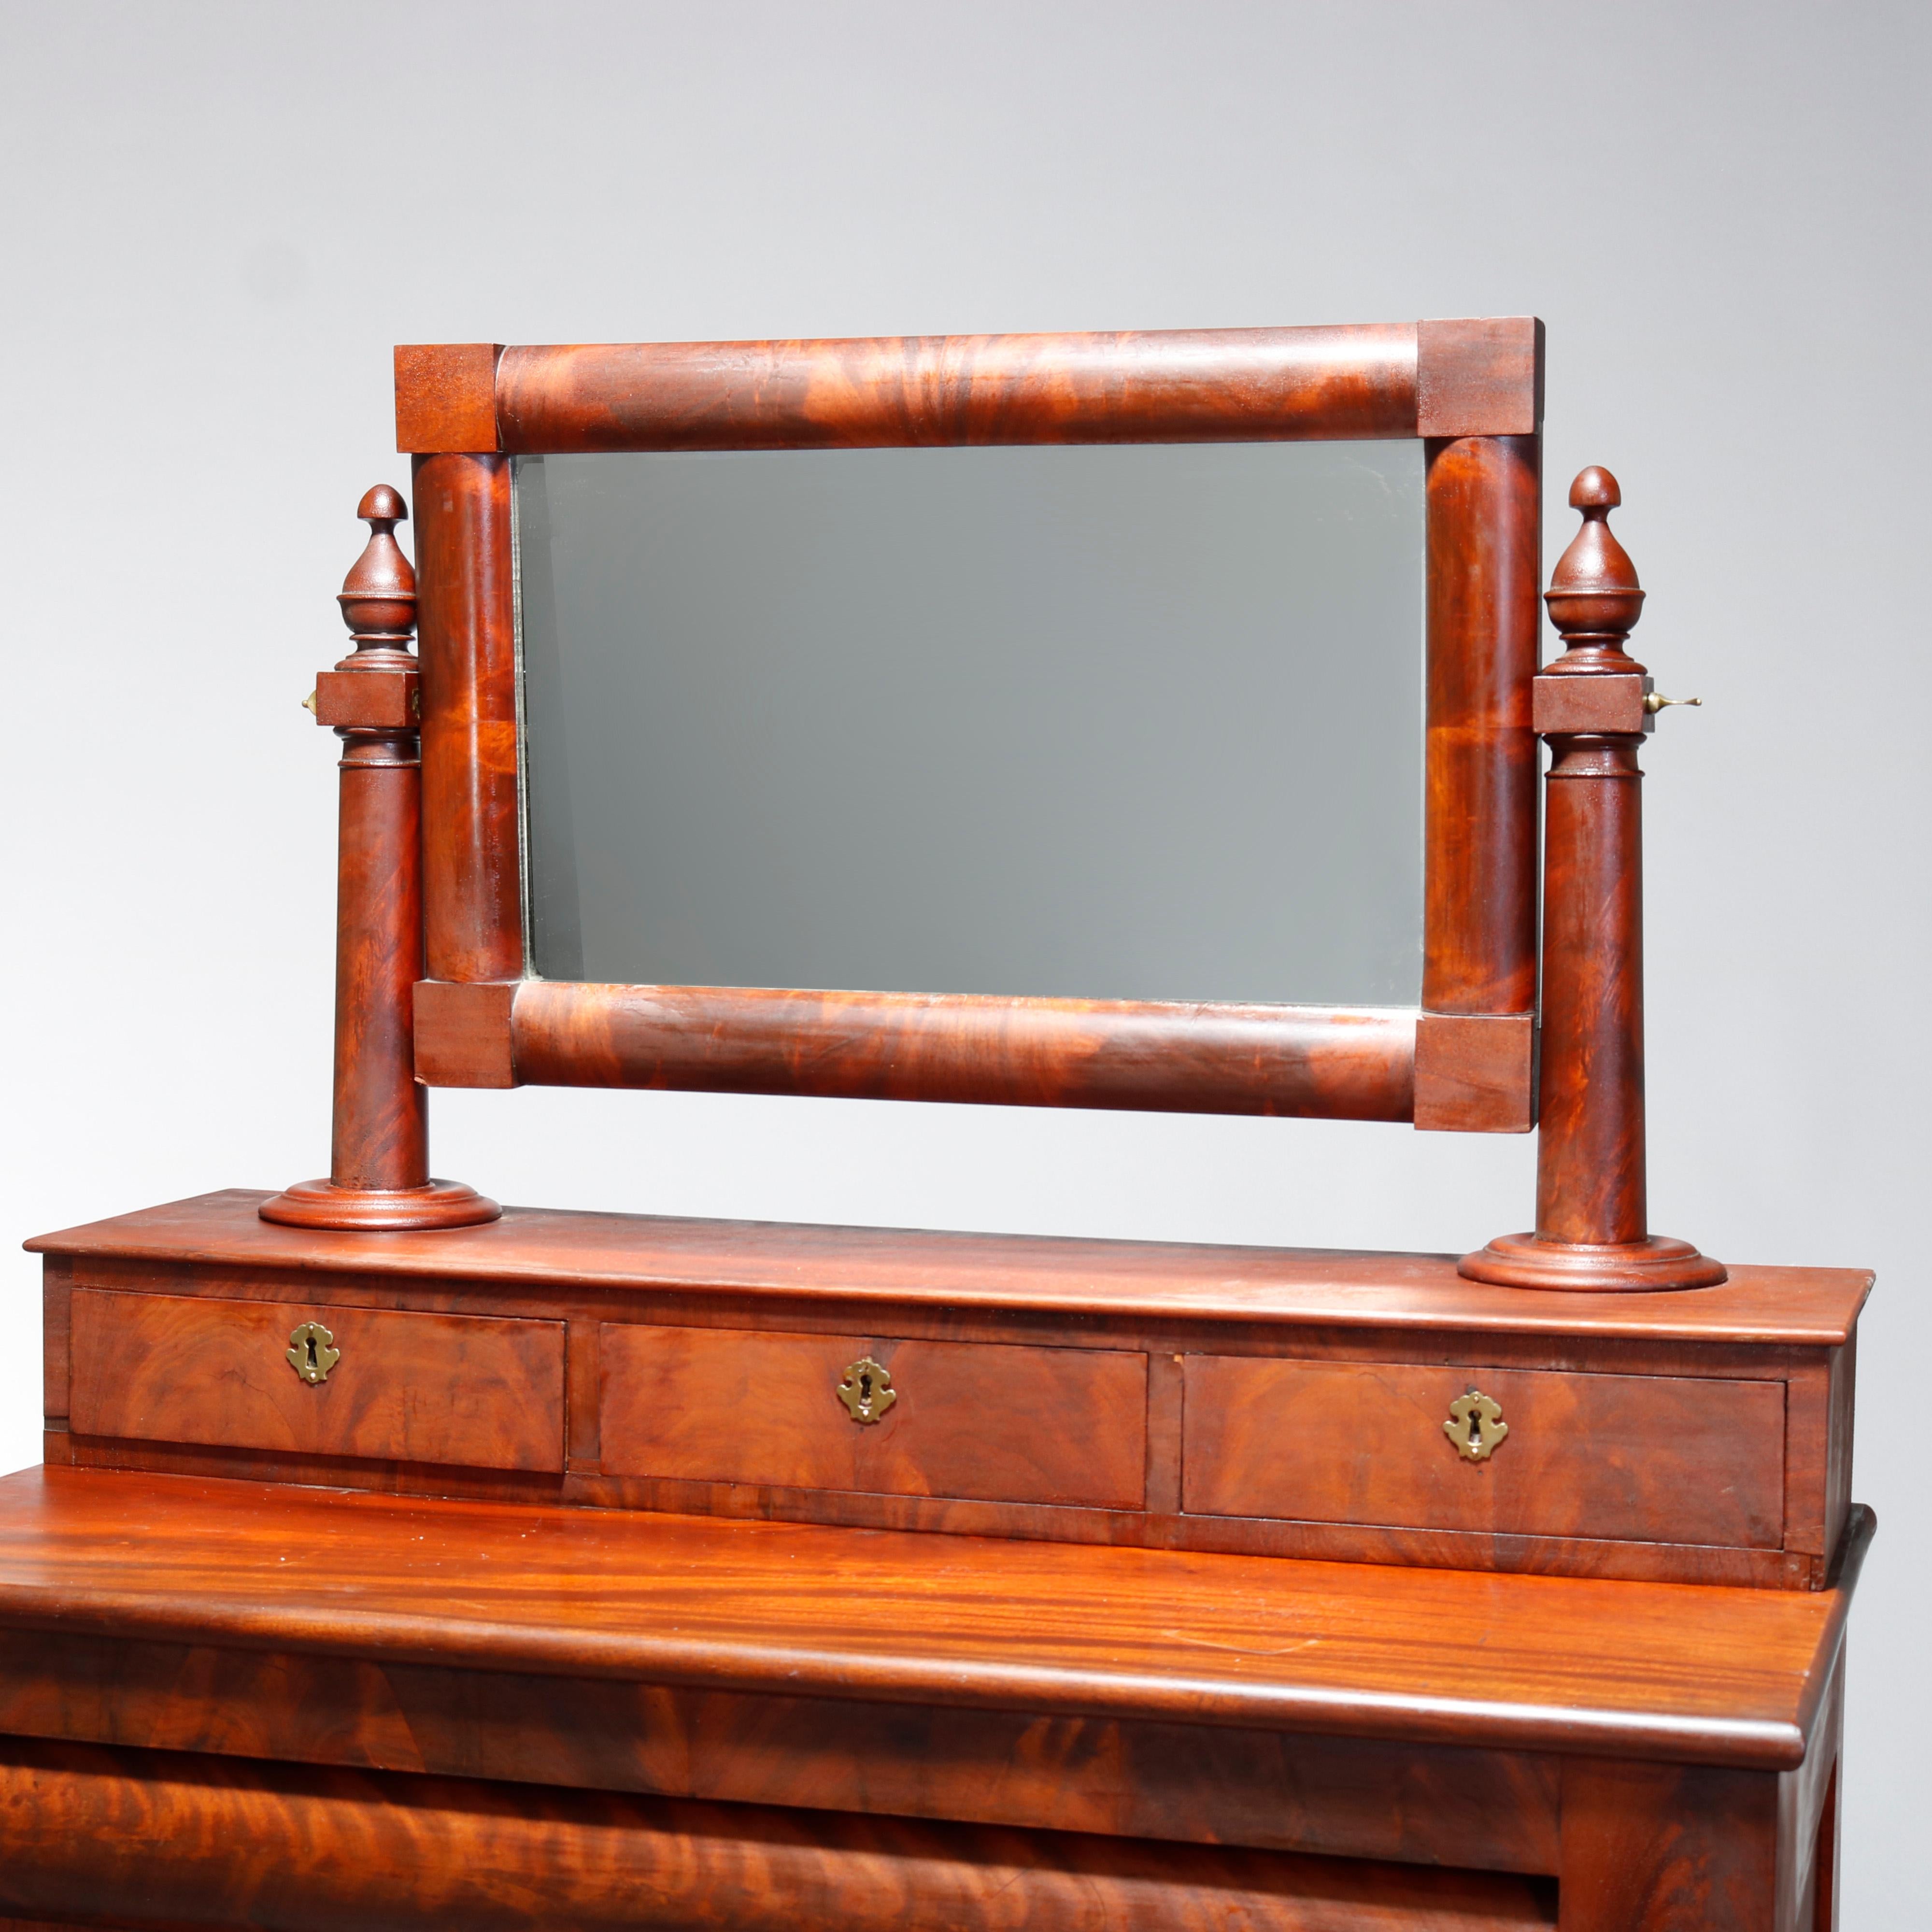 An antique American Empire high chest offers paneled flame mahogany construction with upper swivel mirror having flanking column supports with finals and surmounting case with glove boxes over convex frieze drawer and three long drawers flanked by